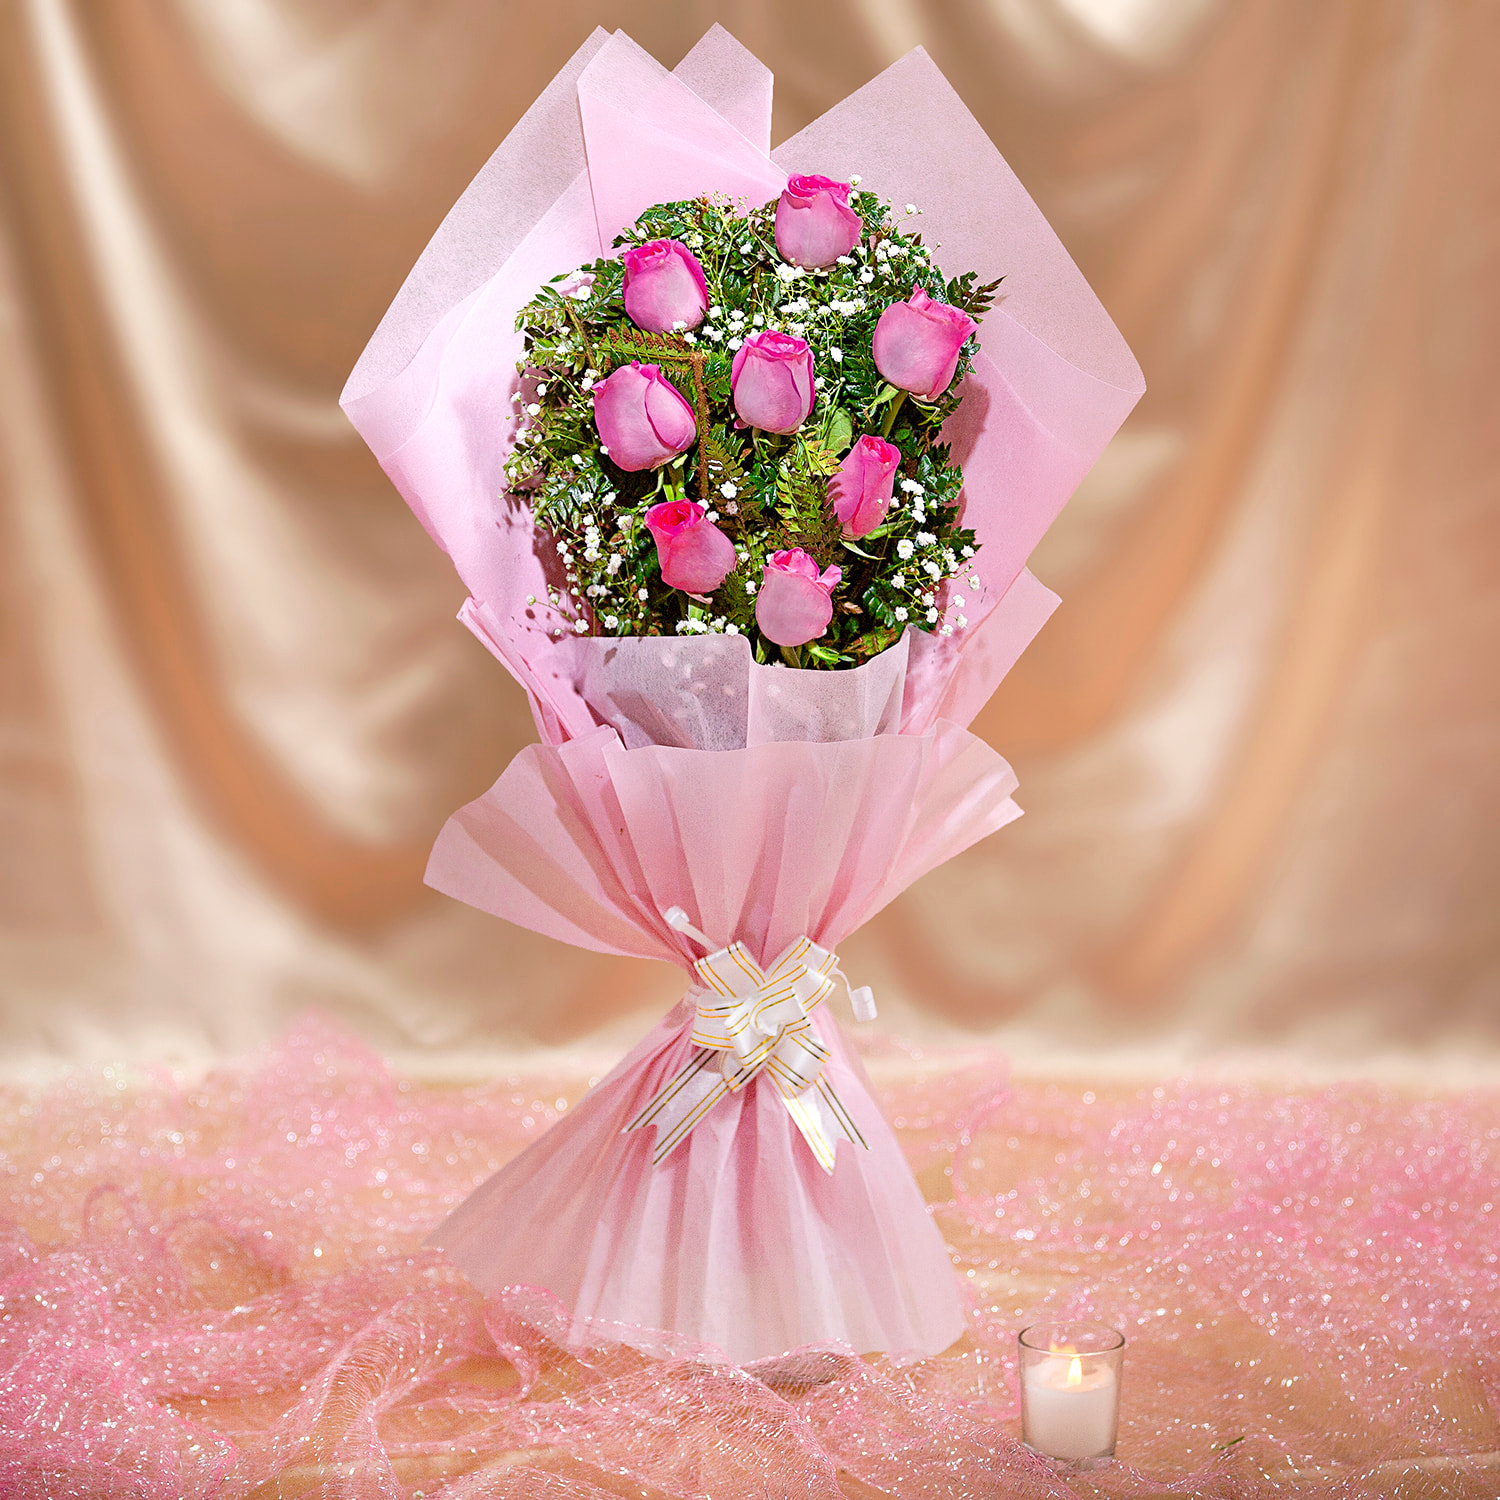 Send Flowers to Hyderabad | Same Day Flower Delivery